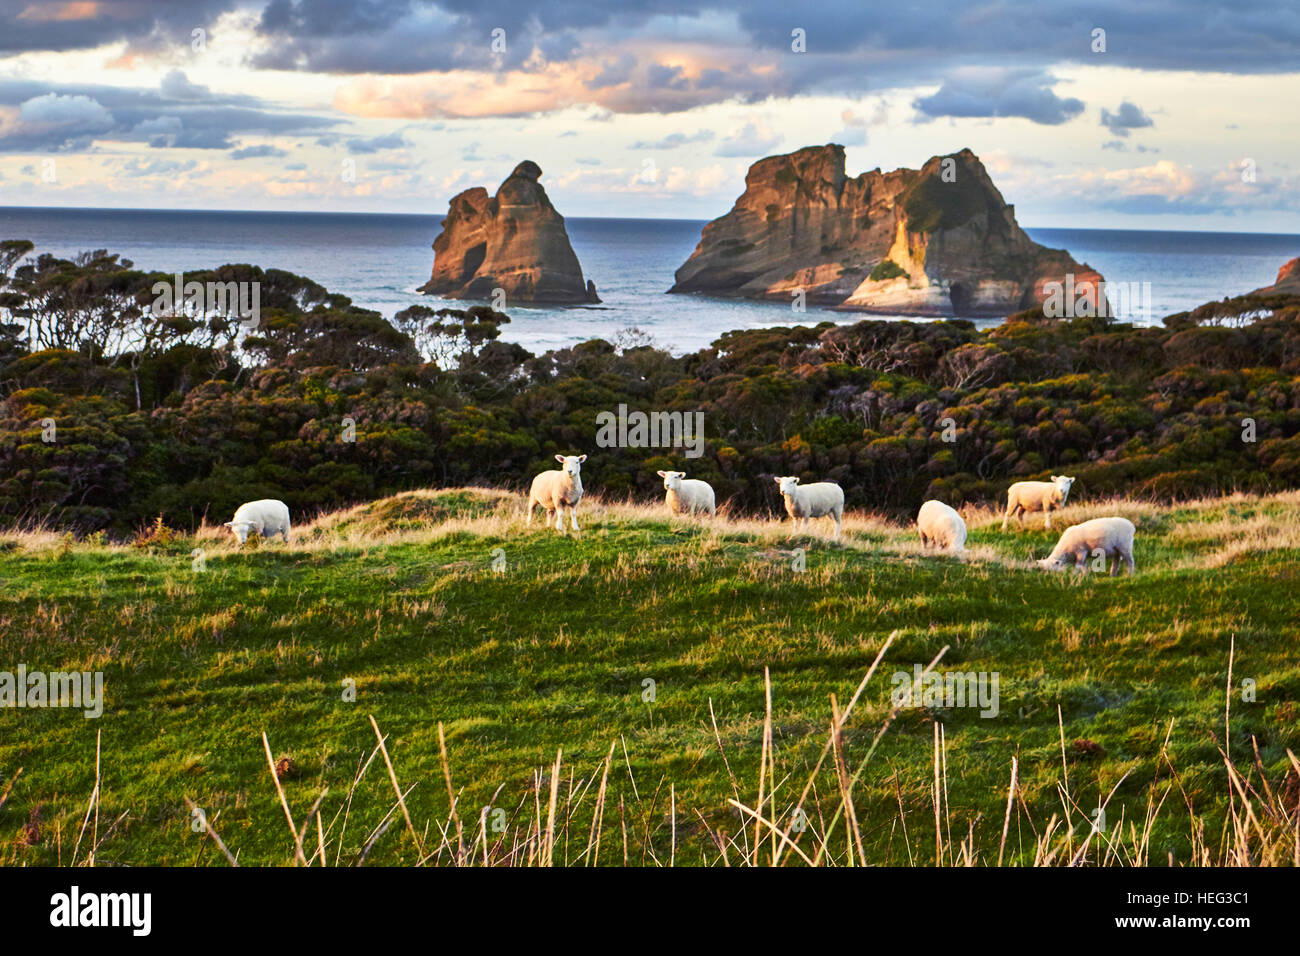 New Zealand, Puponga, Wharariki, sheep on green hill, sea and rock in the background Stock Photo